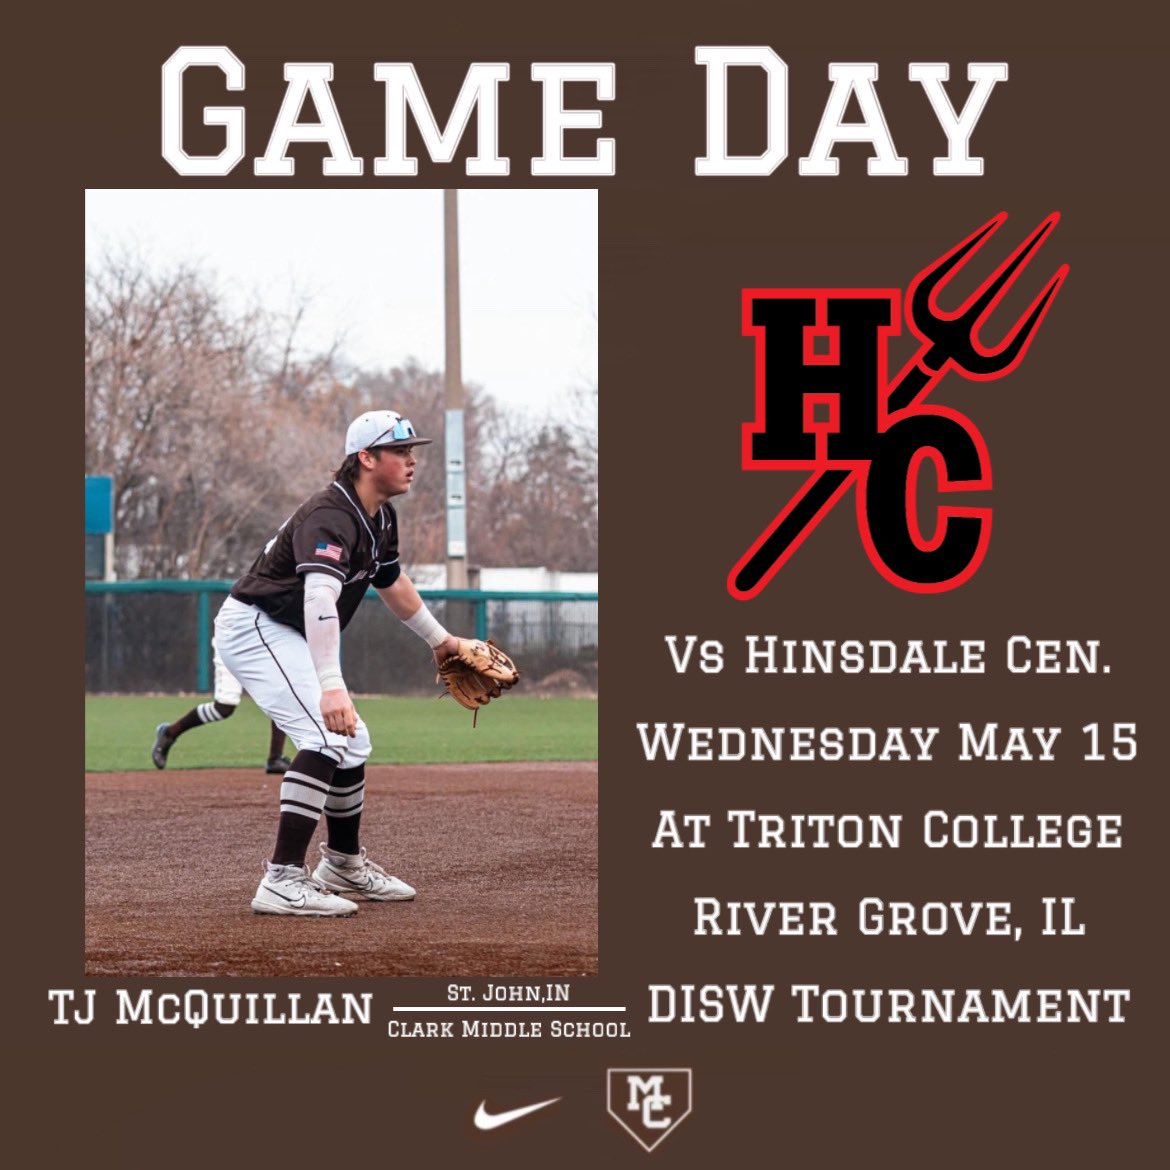 The Caravan will take on Hinsdale Central in the @DISW219 tournament at Triton College today at 6 pm